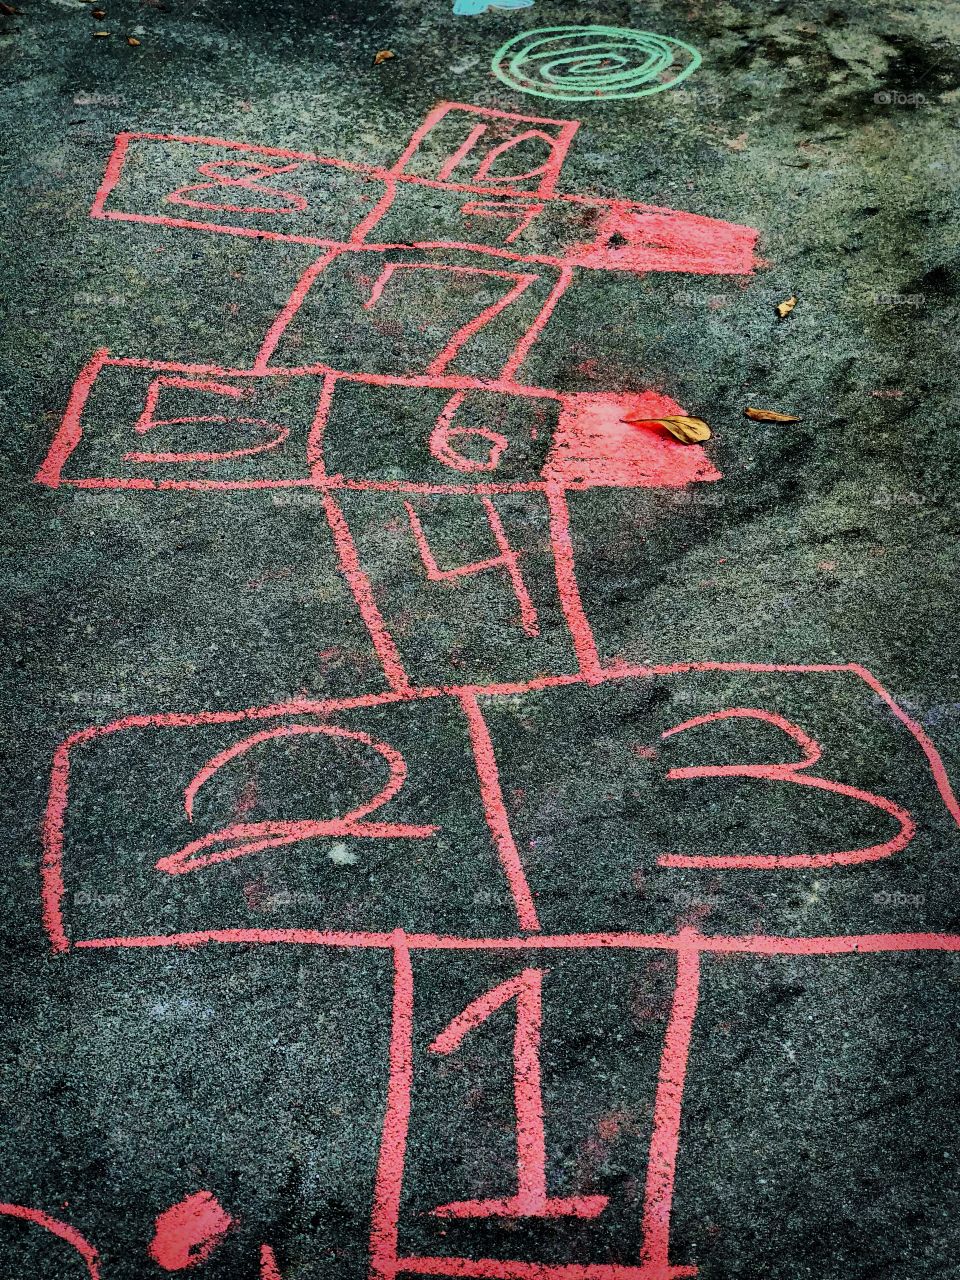 Hopscotch drawn by 10 year old girl while playing outdoors 